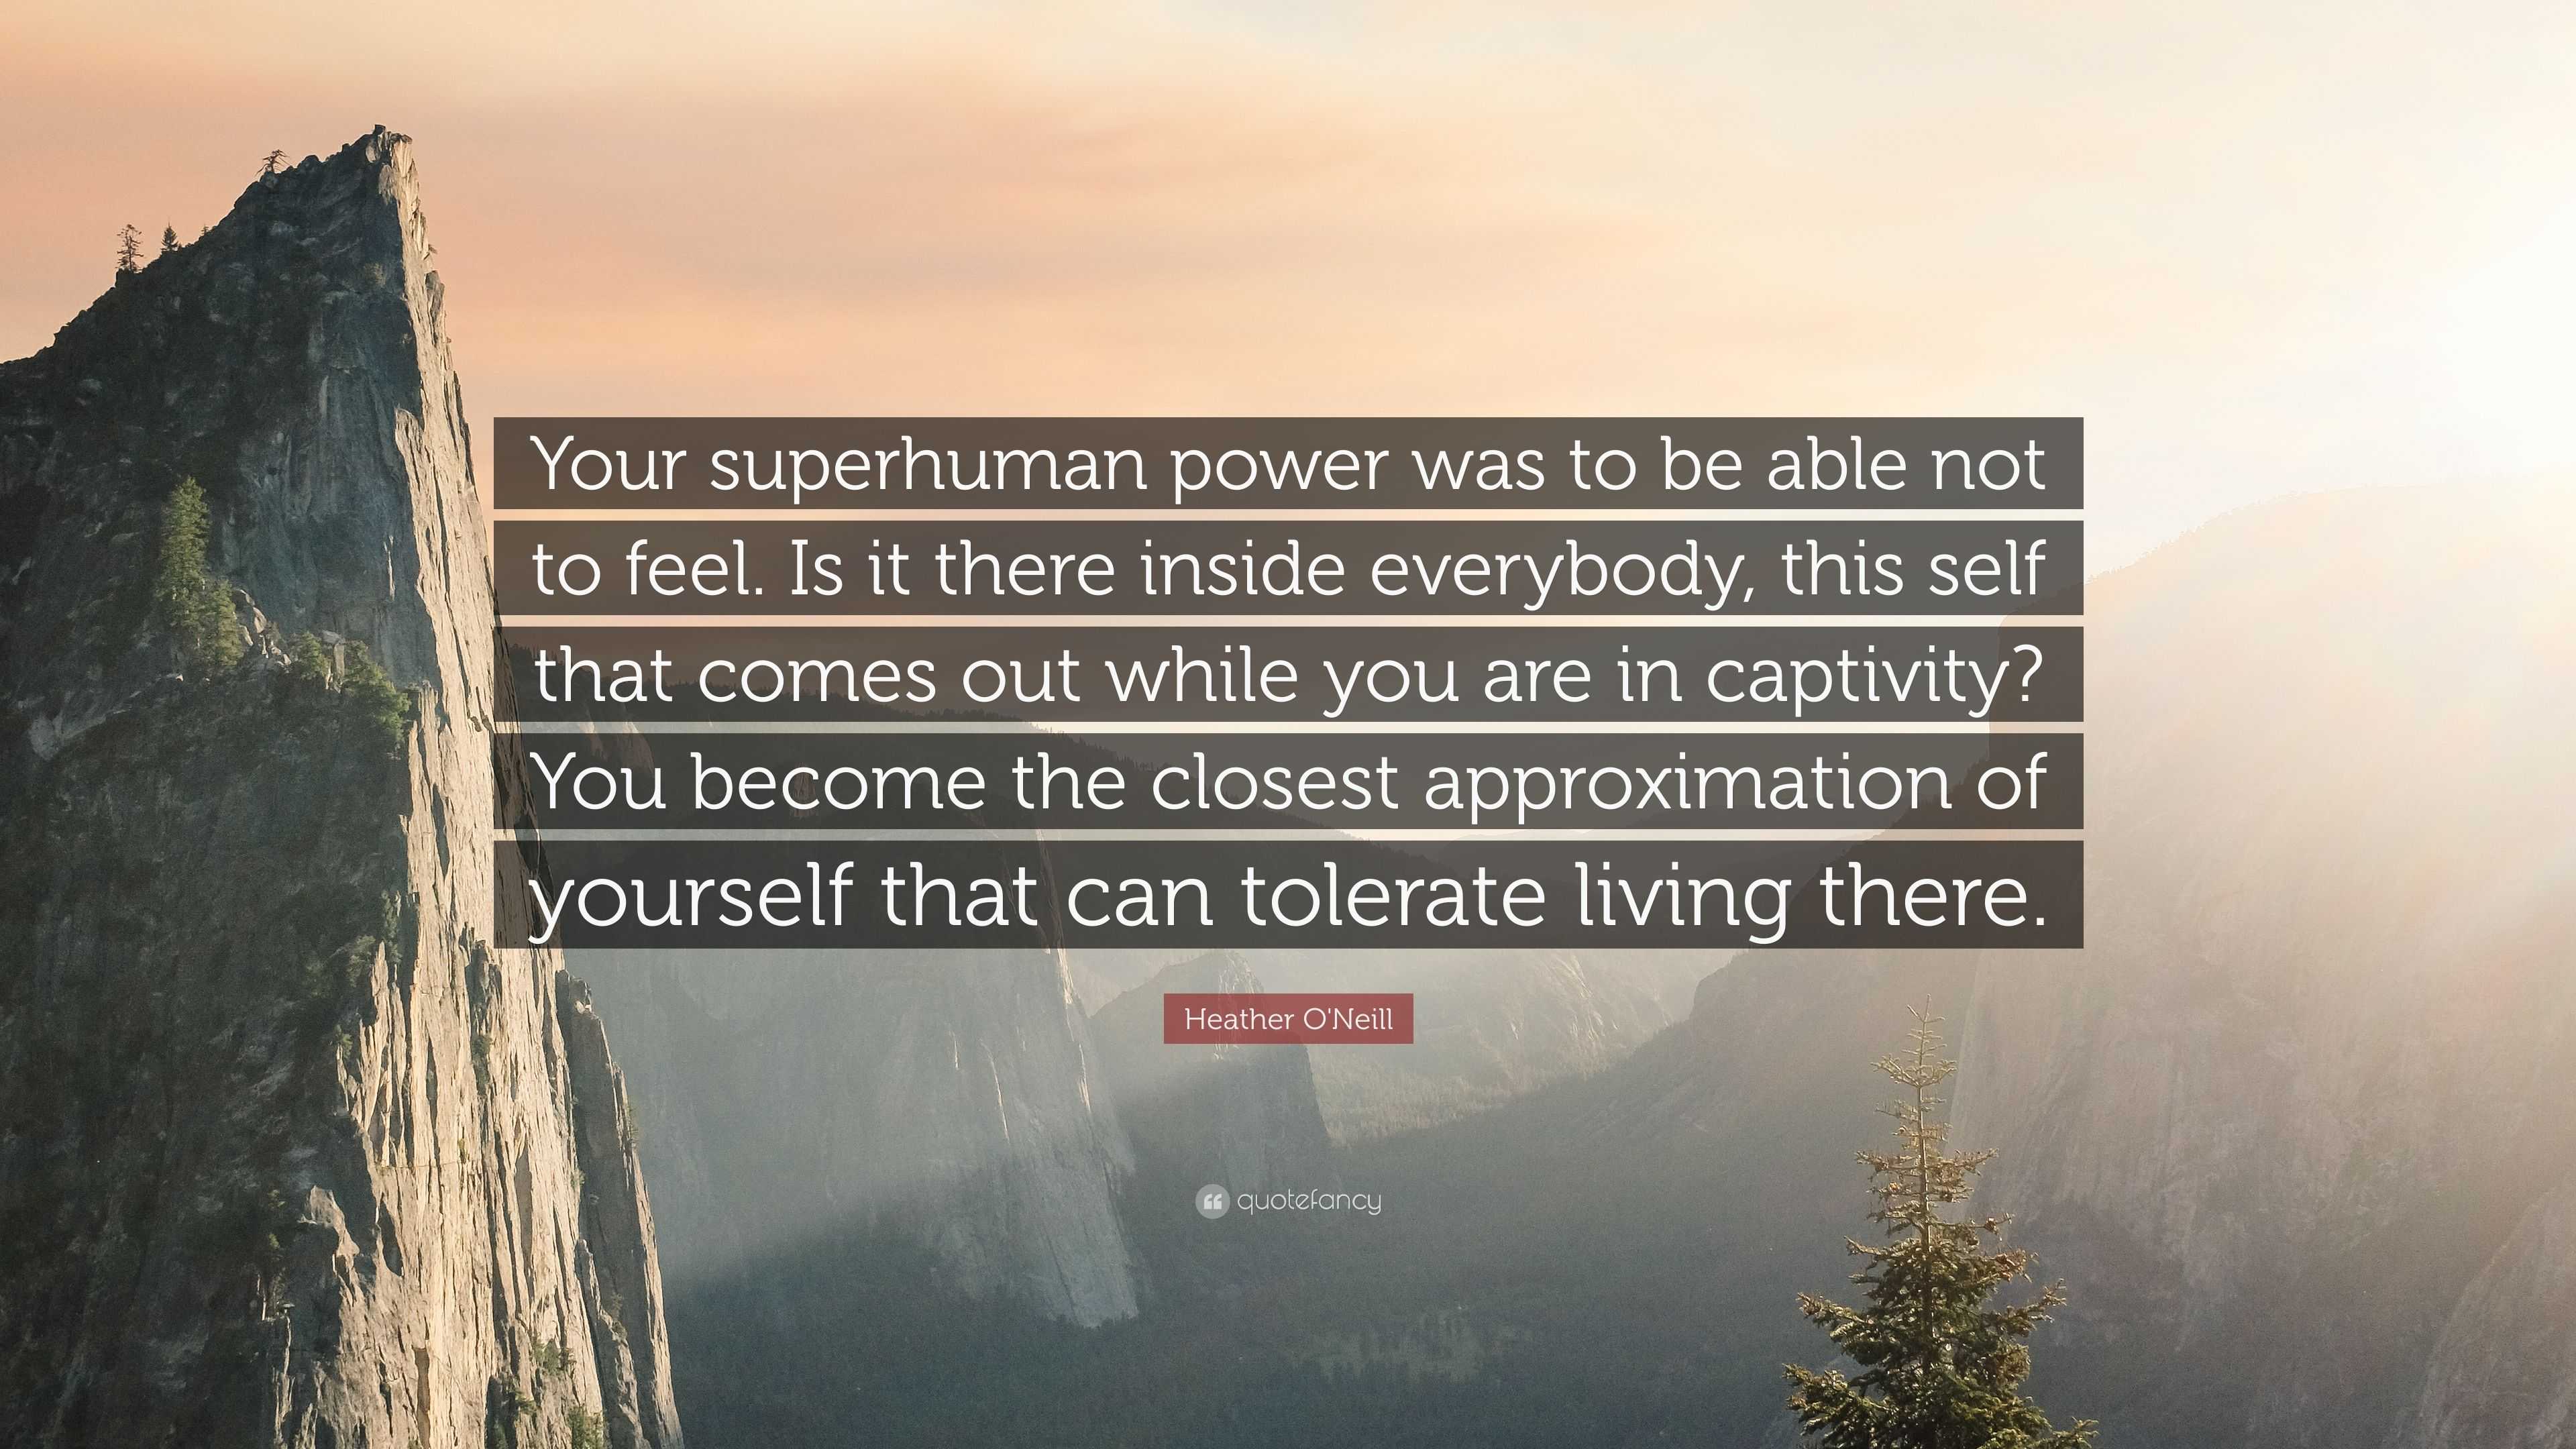 Heather O'Neill Quote: “Your superhuman power was to be able not